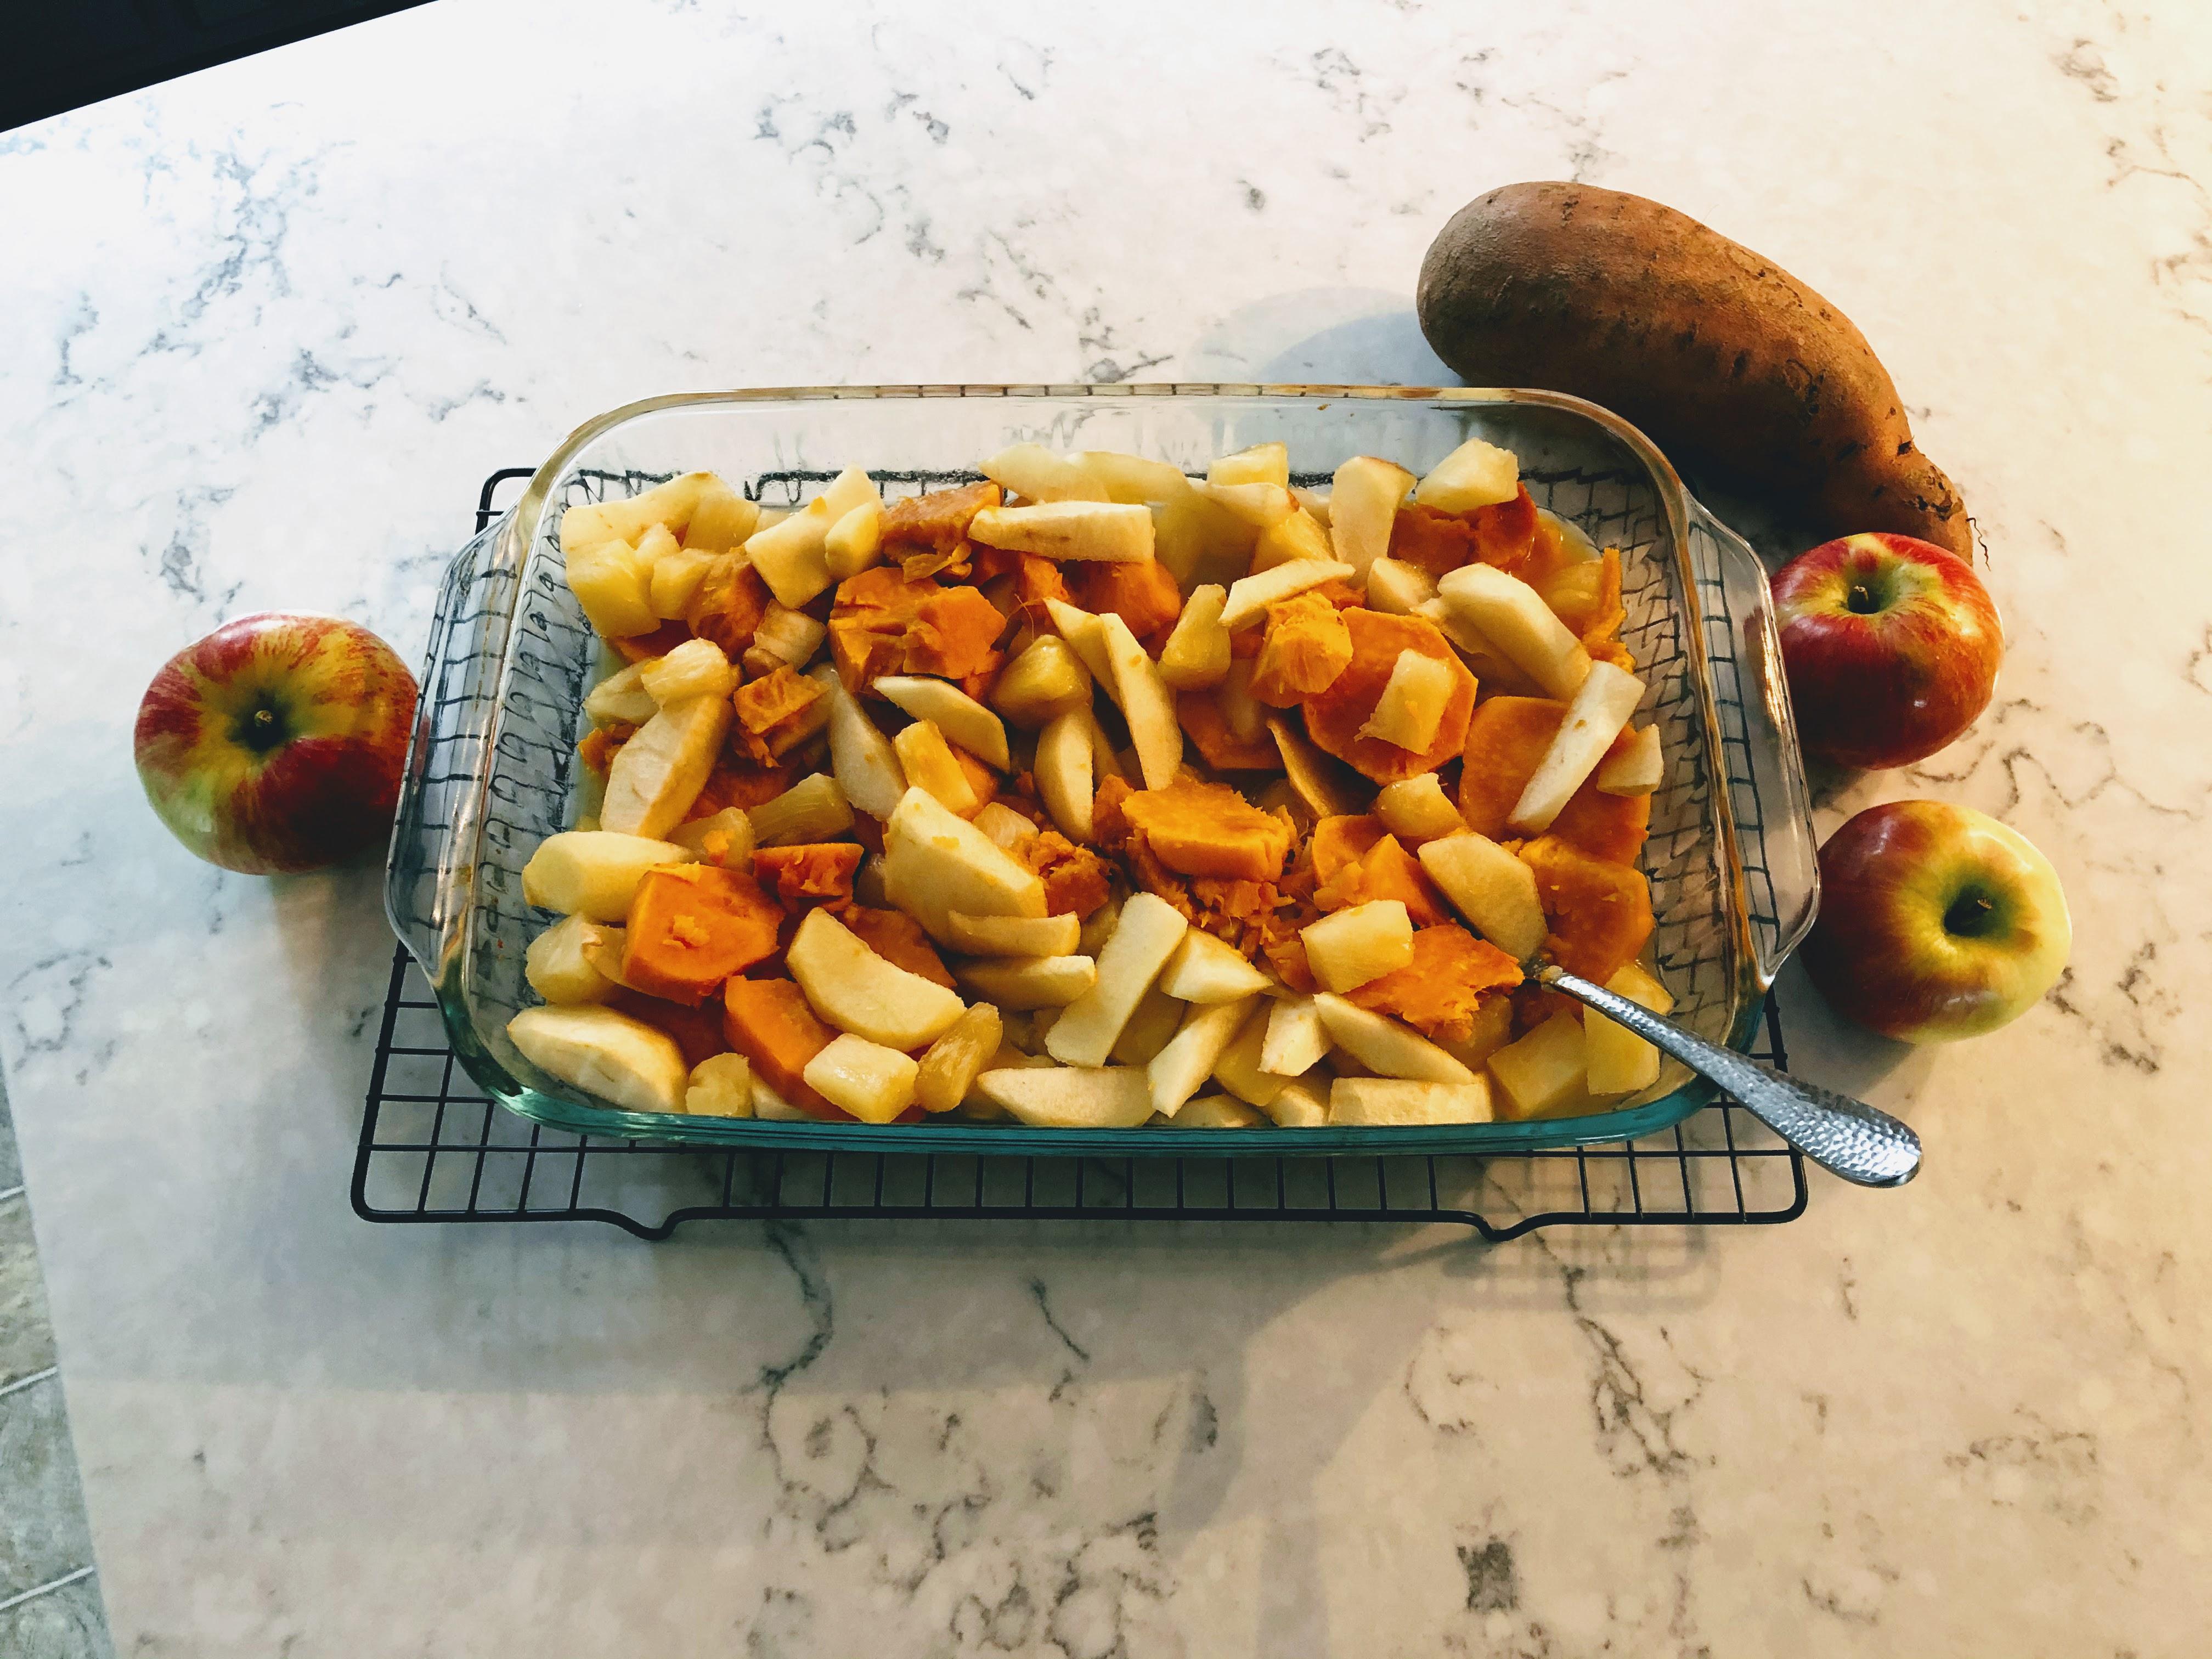 Apples and sweet potatoes in a baking dish